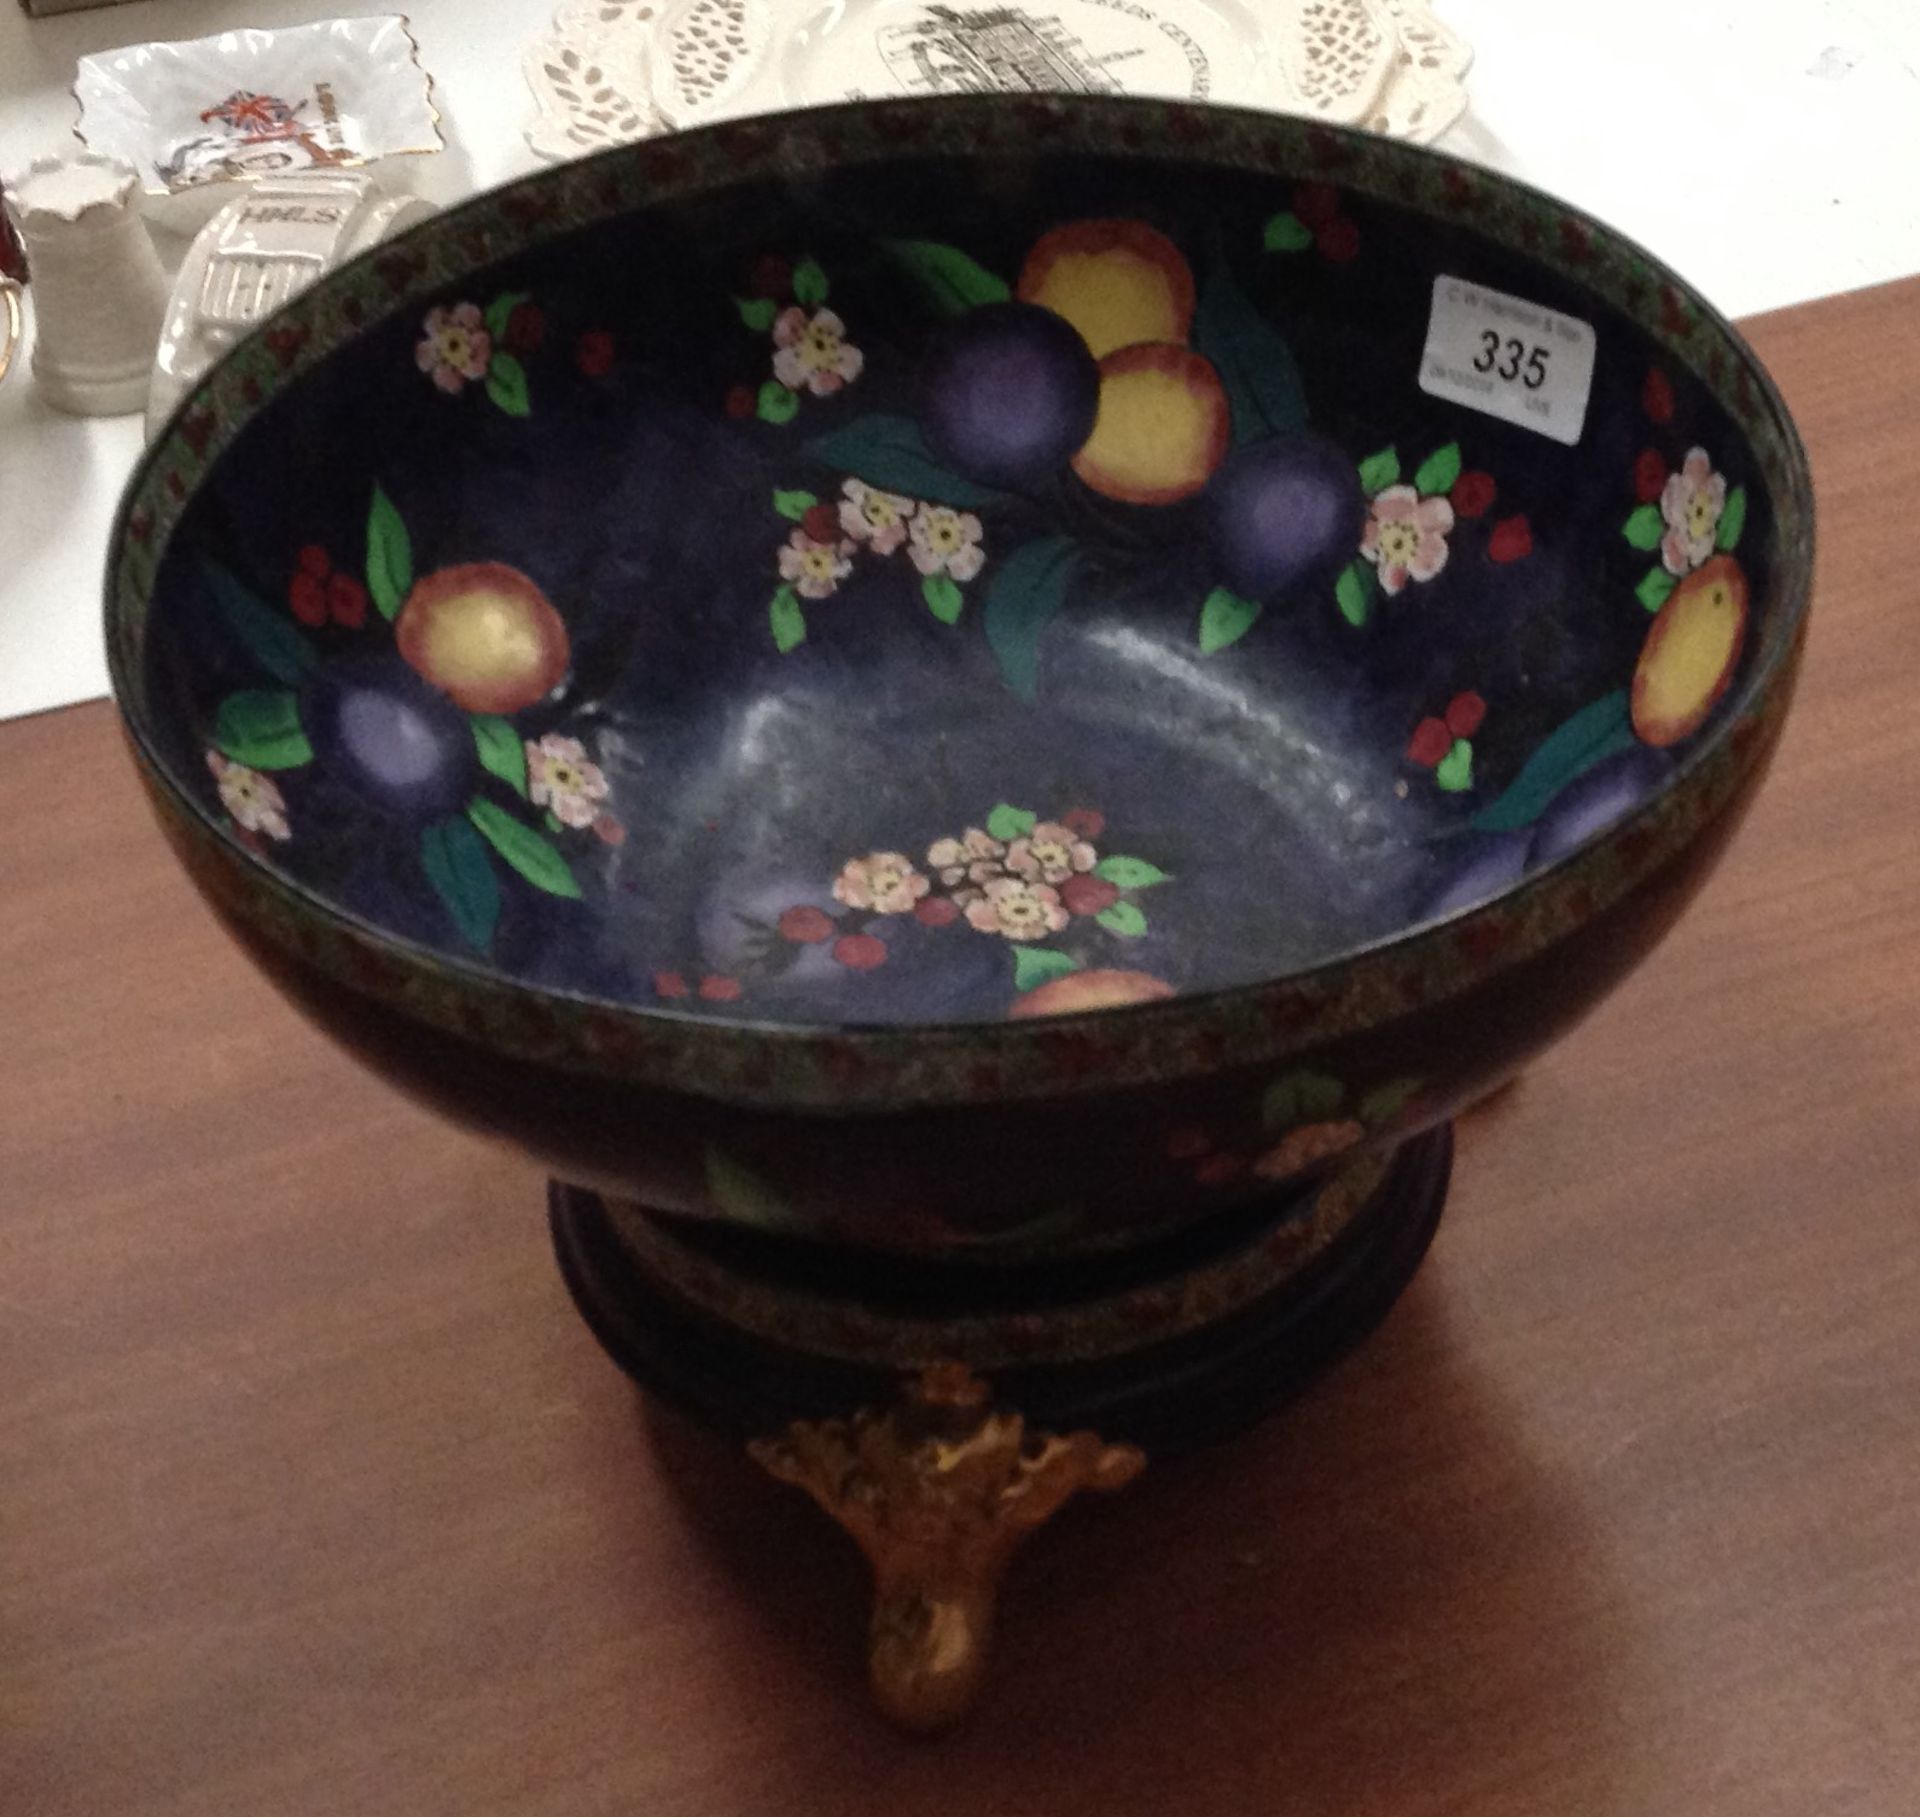 Carltonware blue fruit and floral patterned bowl 25cm diameter on matching three foot stand - Image 2 of 2